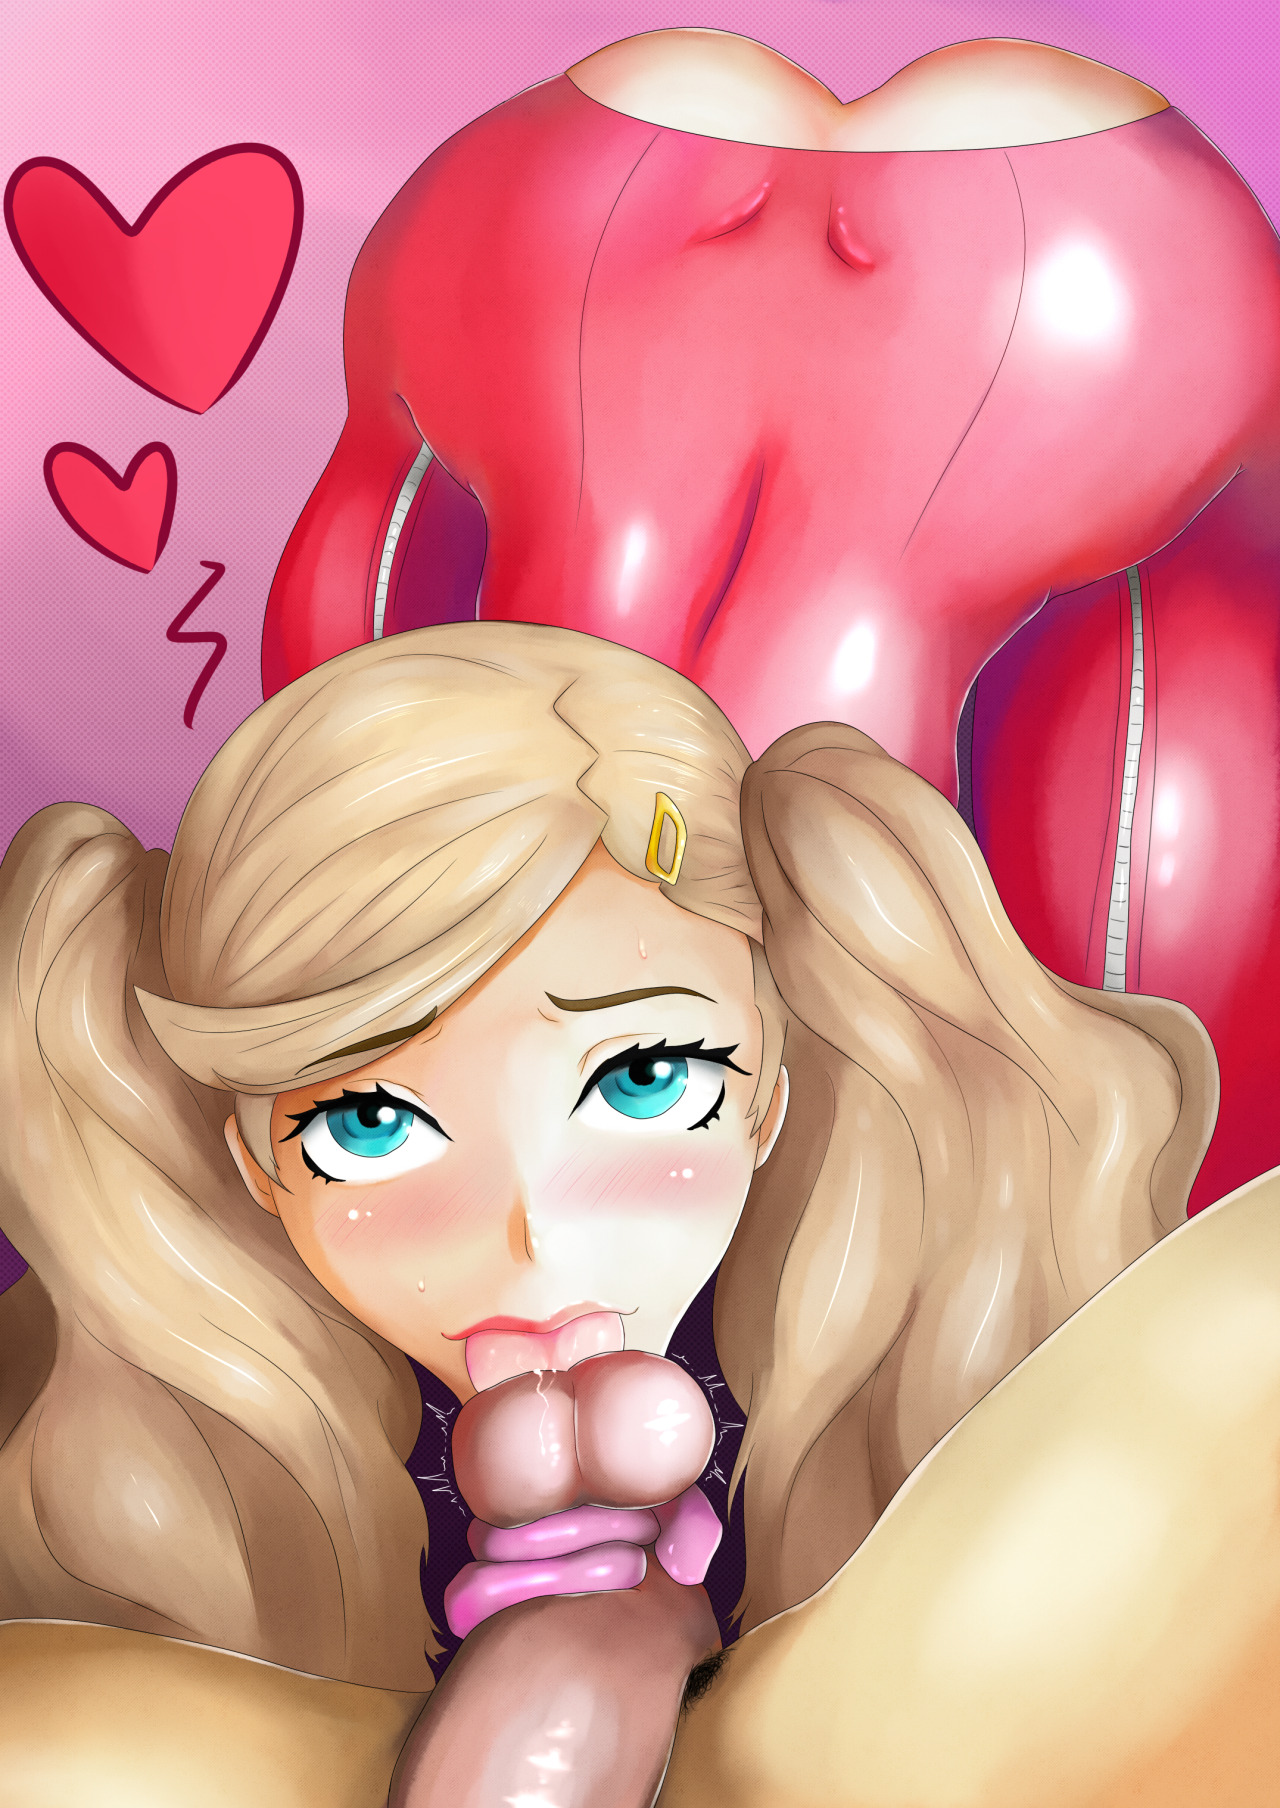 hentai-dreams-goddess-second:  “The super sexy cat girl Anne Takamaki doing her